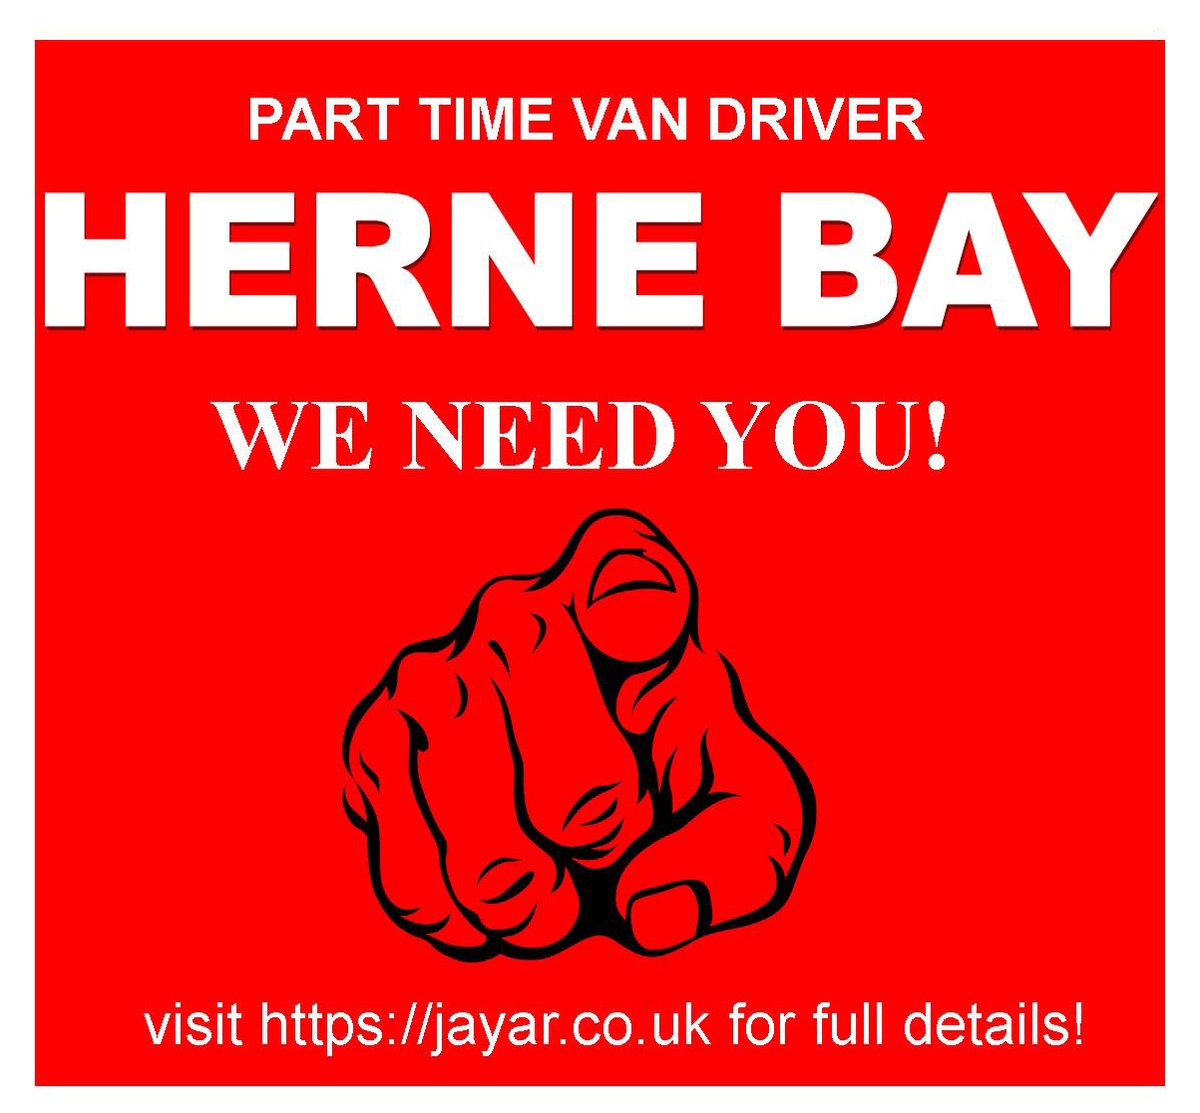 ***WE ARE HIRING***
Join our brilliant team!
We are looking for a part time Van Driver for our busy Herne Bay Branch.
For a full job description & to apply, please visit
jayar.co.uk/jobs/part-time…
Good Luck! 👍#kentjobs #jobsinkent #hernebayjobs #jobsinhernebay